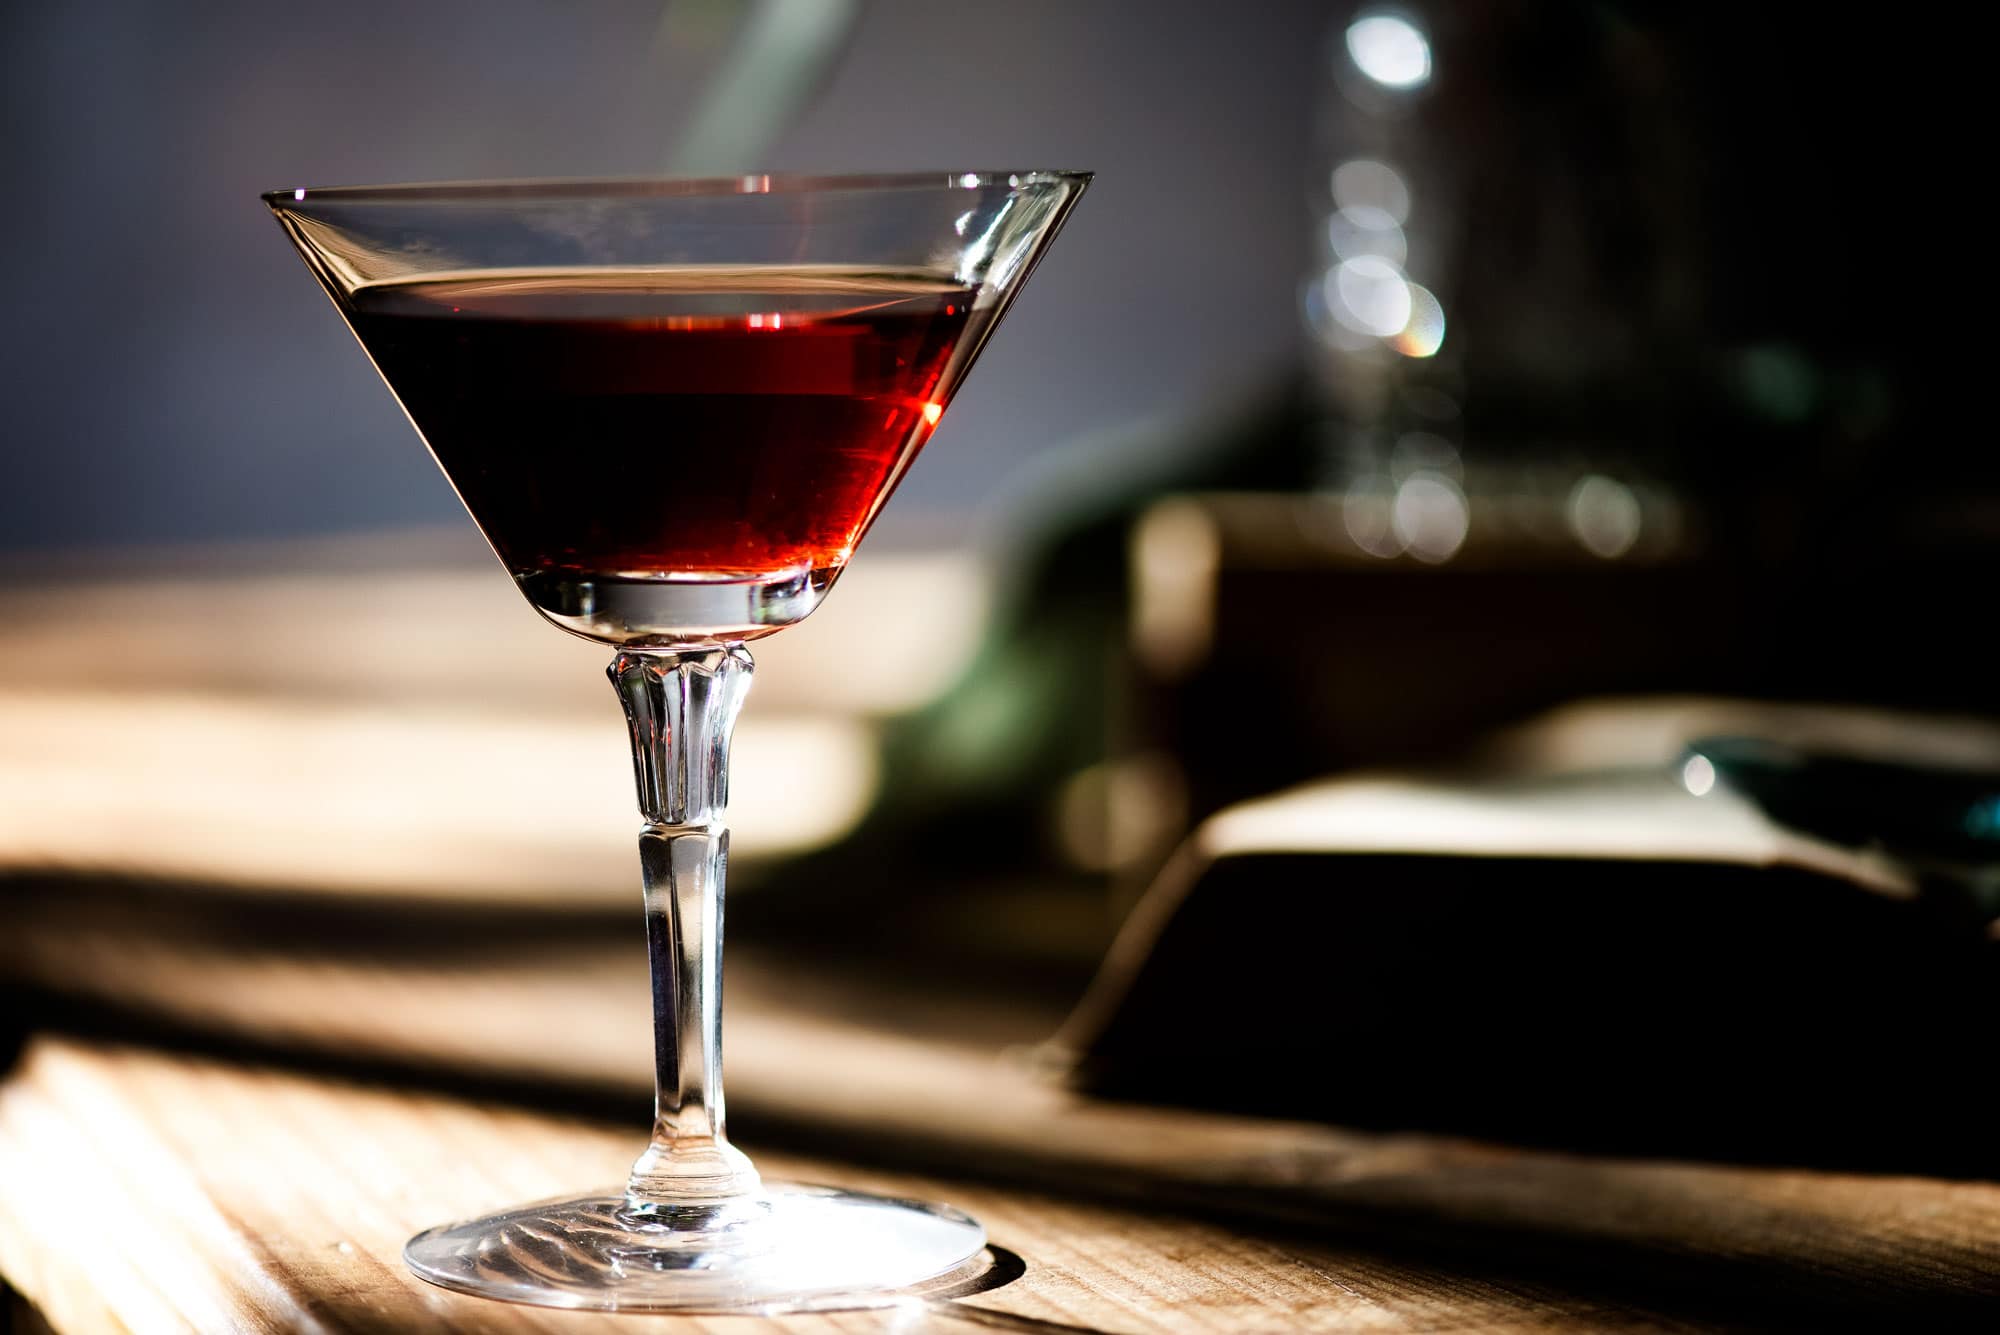 Martini glass with red drink sitting on a wood counter